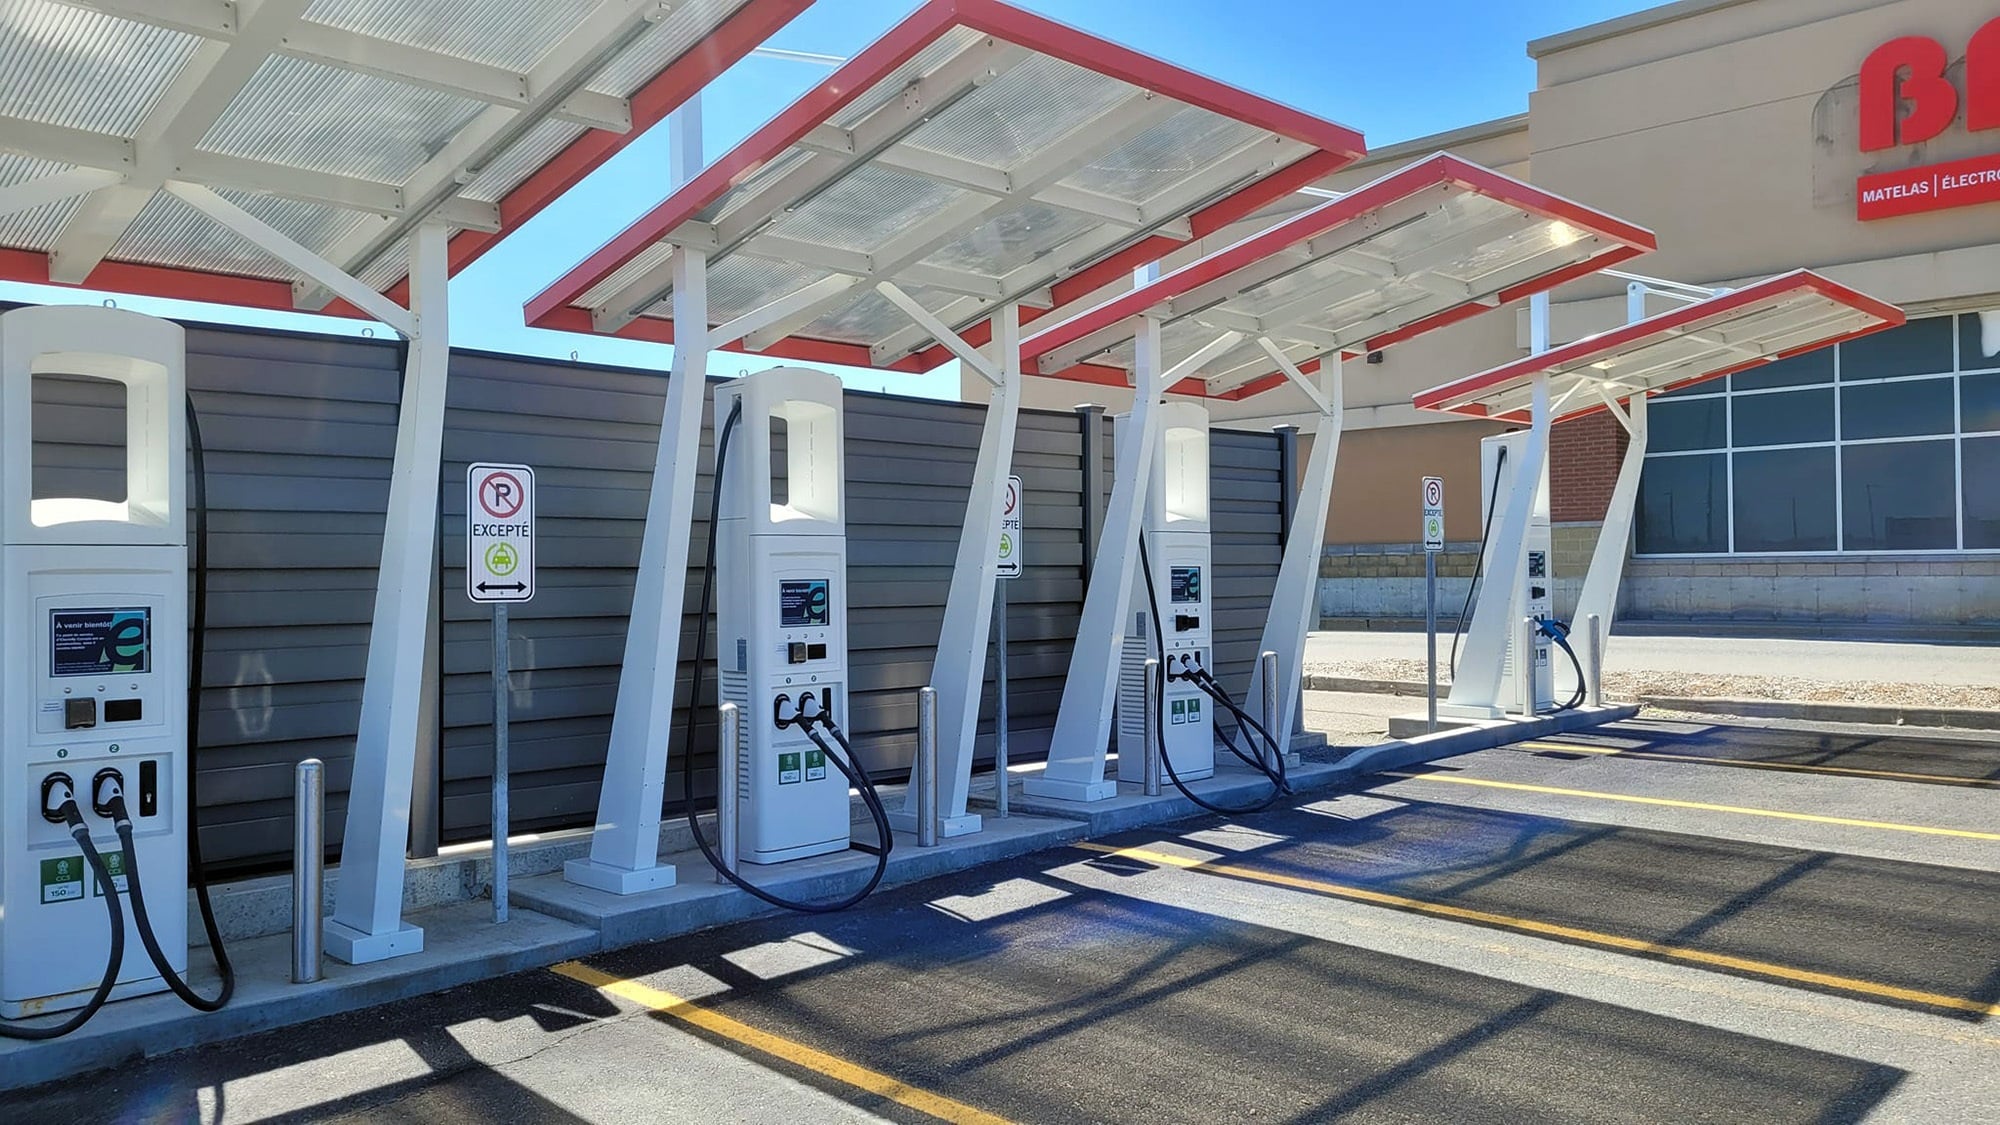 Sherbrooke Electrify Canada charging stations